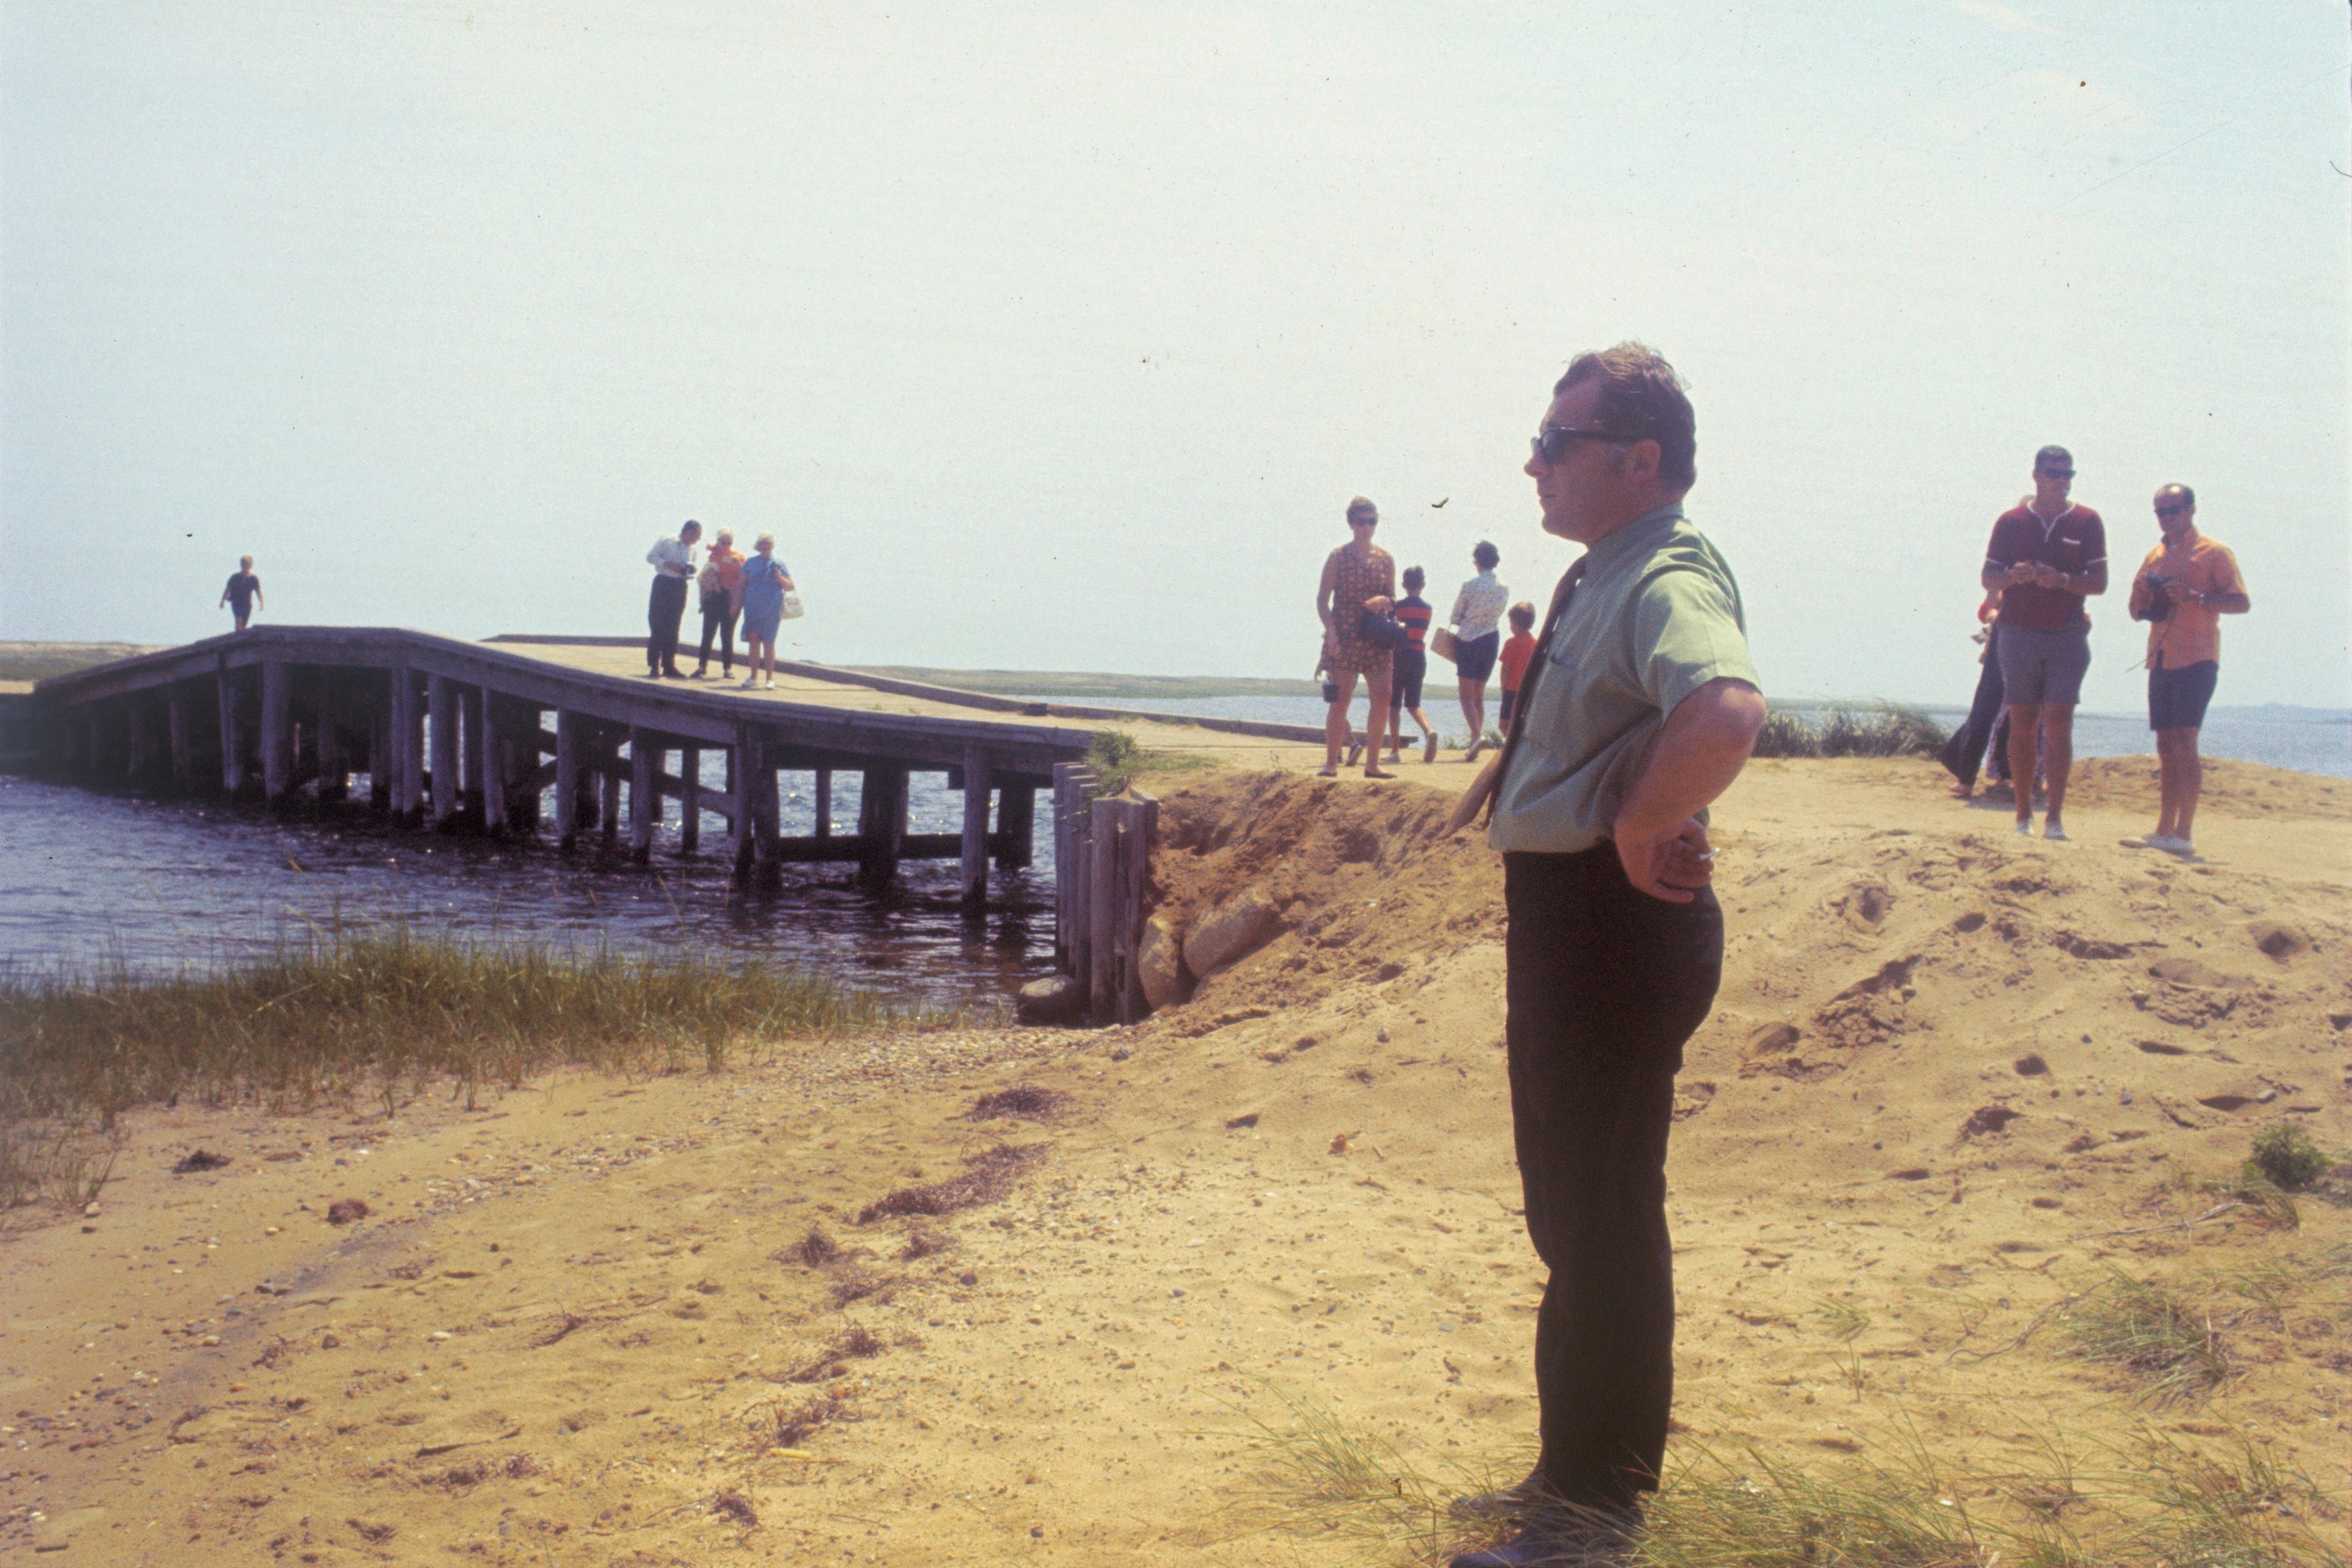 What Happened to Chappaquiddick After the Ted Kennedy Incident